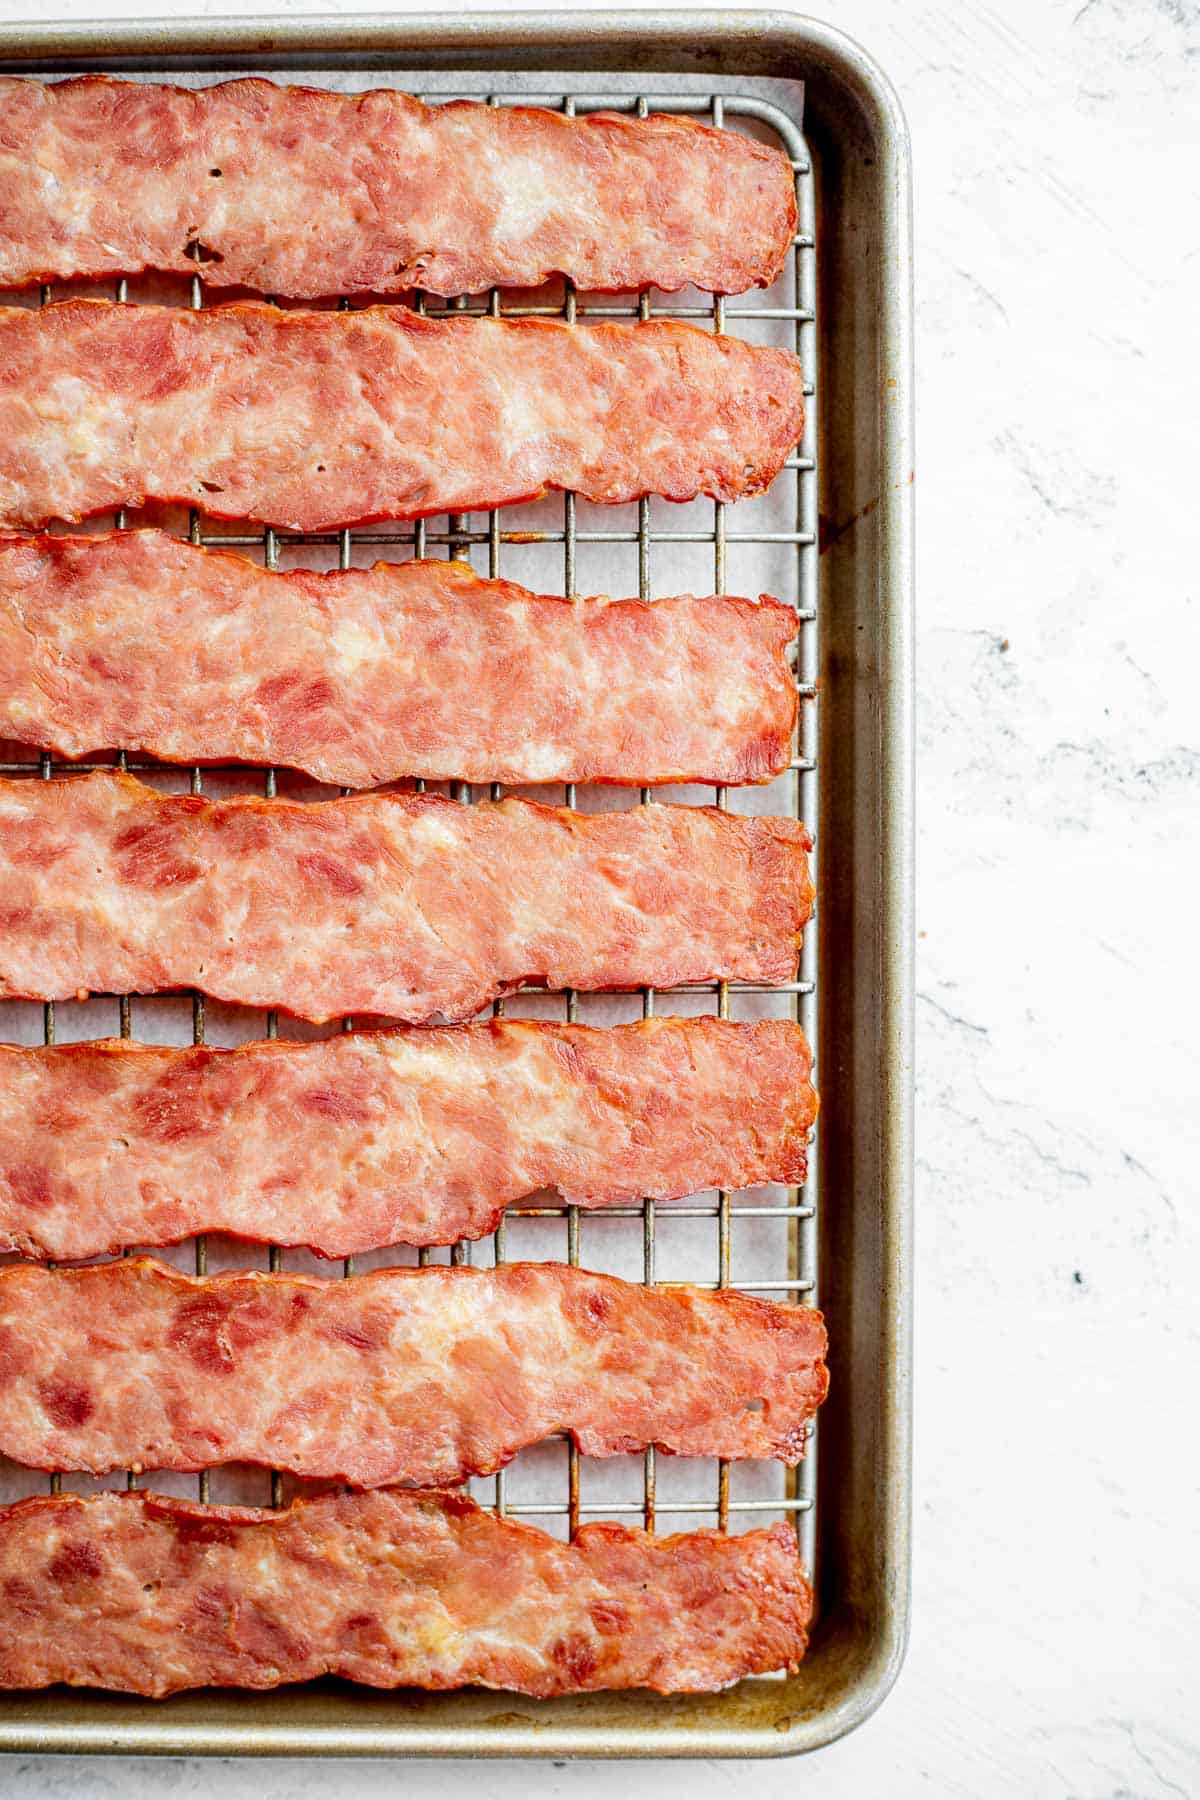 oven baked turkey bacon on wire rack on baking sheet.